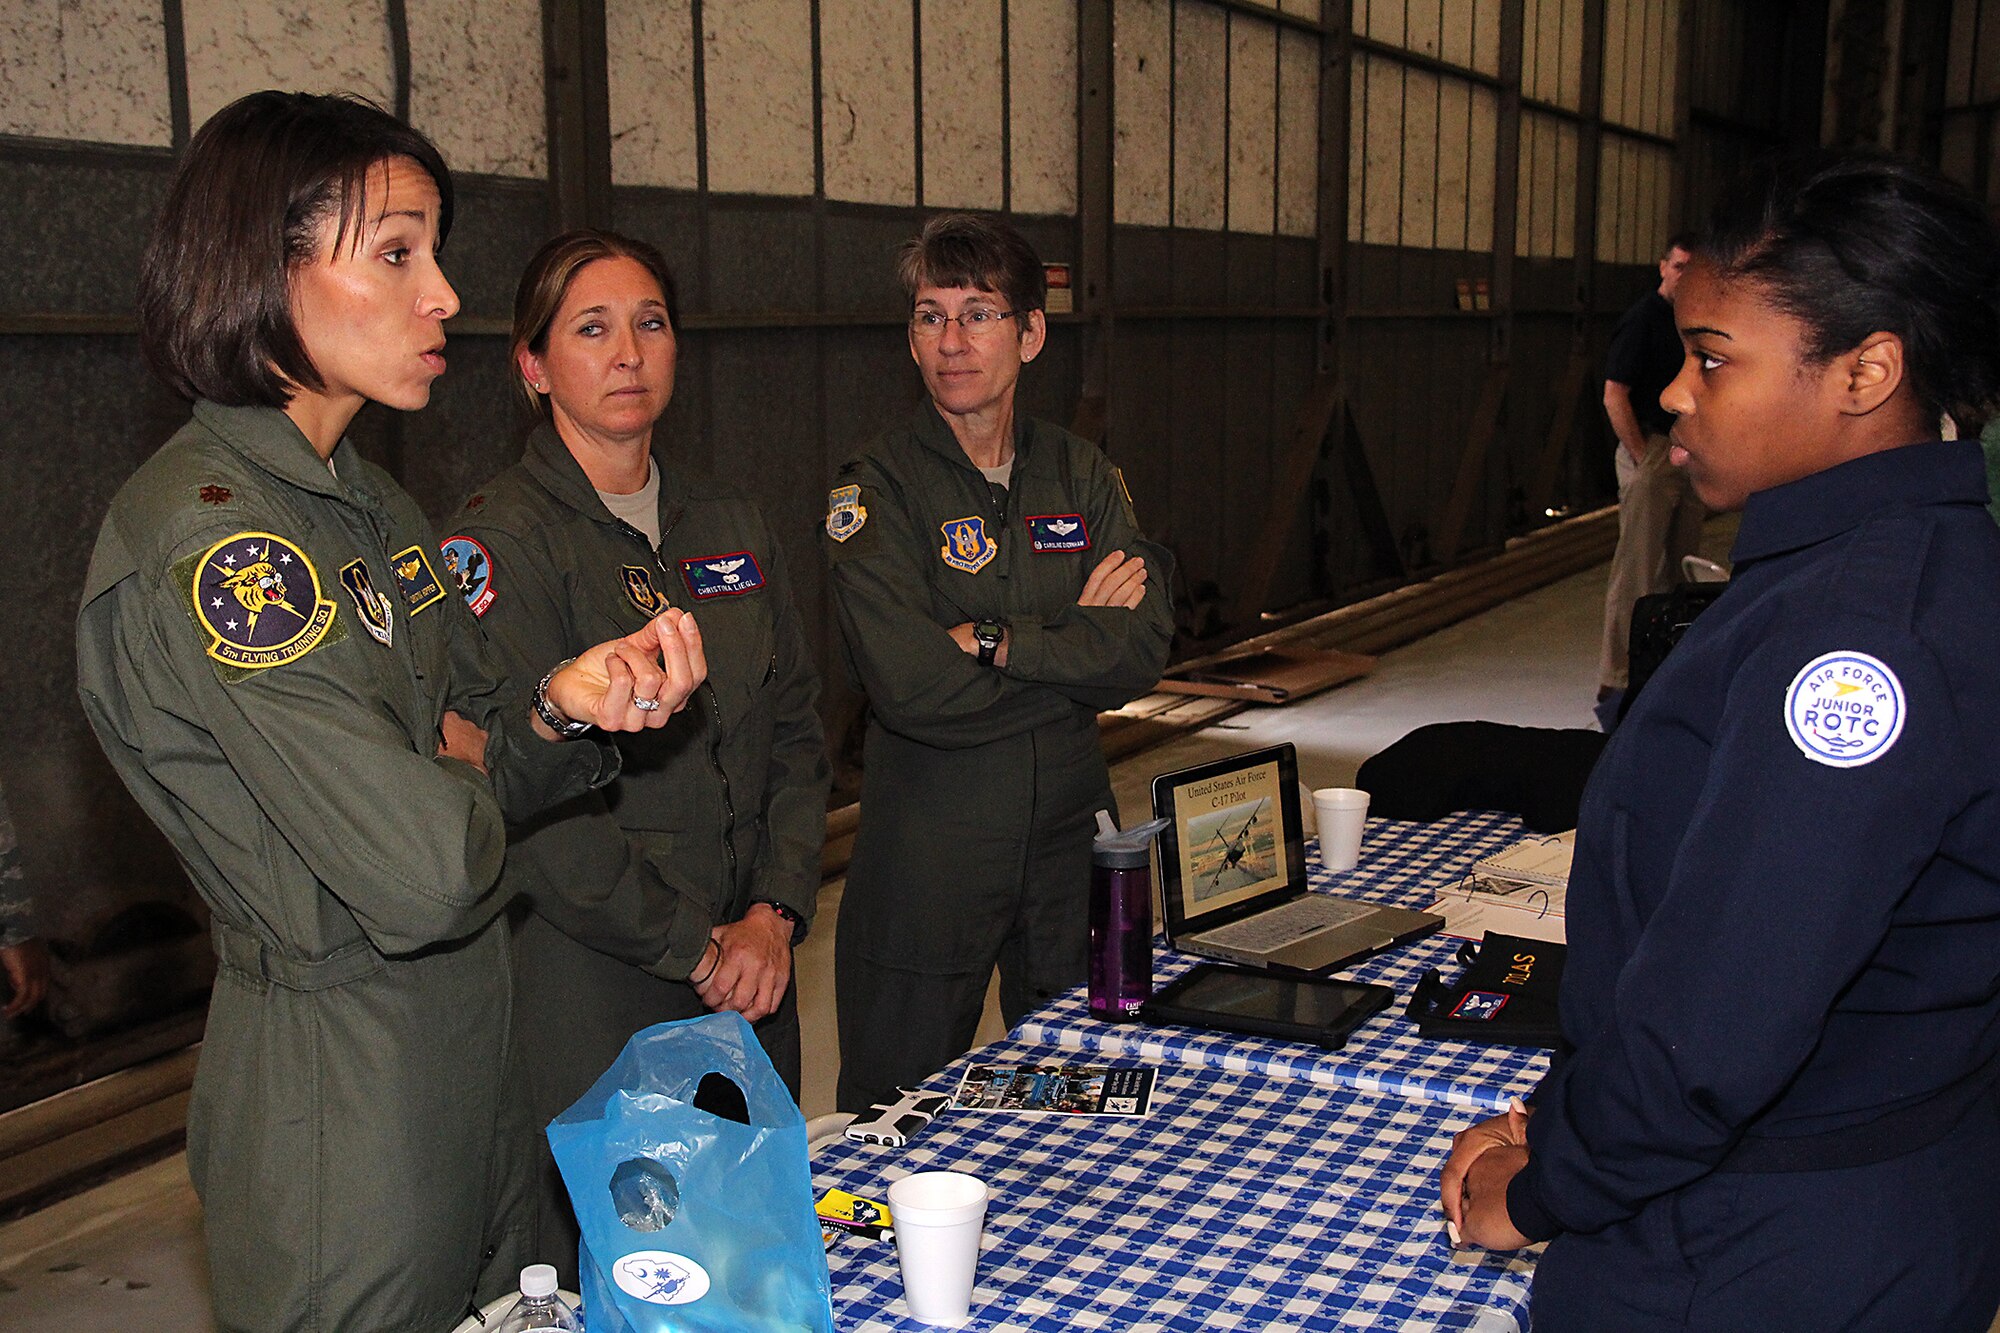 Maj. Christina "Thumper" Hopper (left), from the 71st Flying Training Wing at Vance Air Force Base, Oklahoma, speaks to Charleston area high school girls at the 8th Annual Joint Base Charleston Women in Aviation Career Day. Hopper was the first African-American female fighter pilot to fly combat missions during a major war. She shared stories of her overcoming adversity and challenges early in her life, and challenged the girls to be anything they want to be. (U.S. Air Force Photo / Michael Dukes)